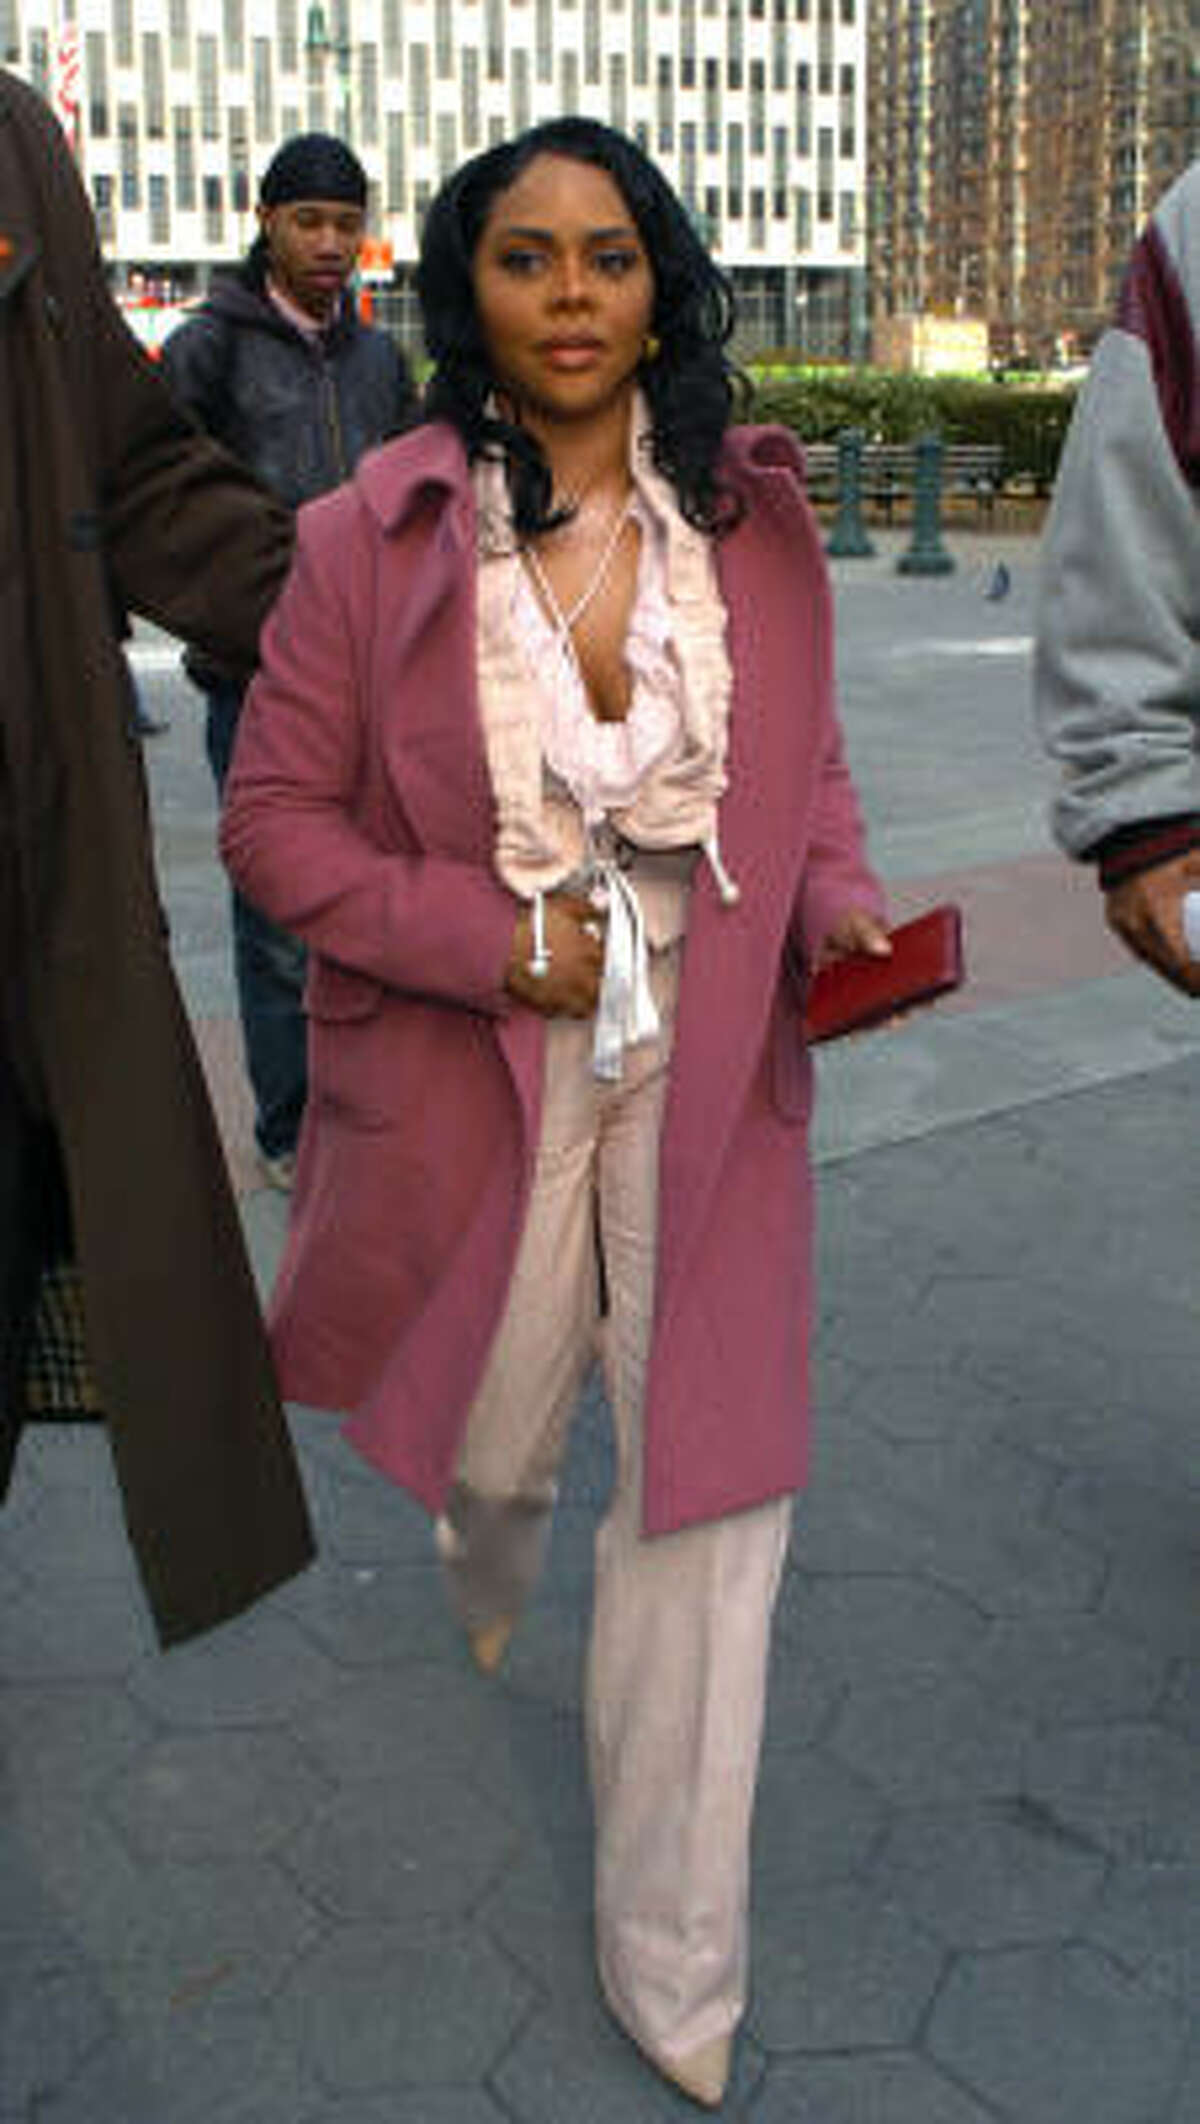 Lil' Kim has a long history of plastic "procedures." Here she is in 2005.